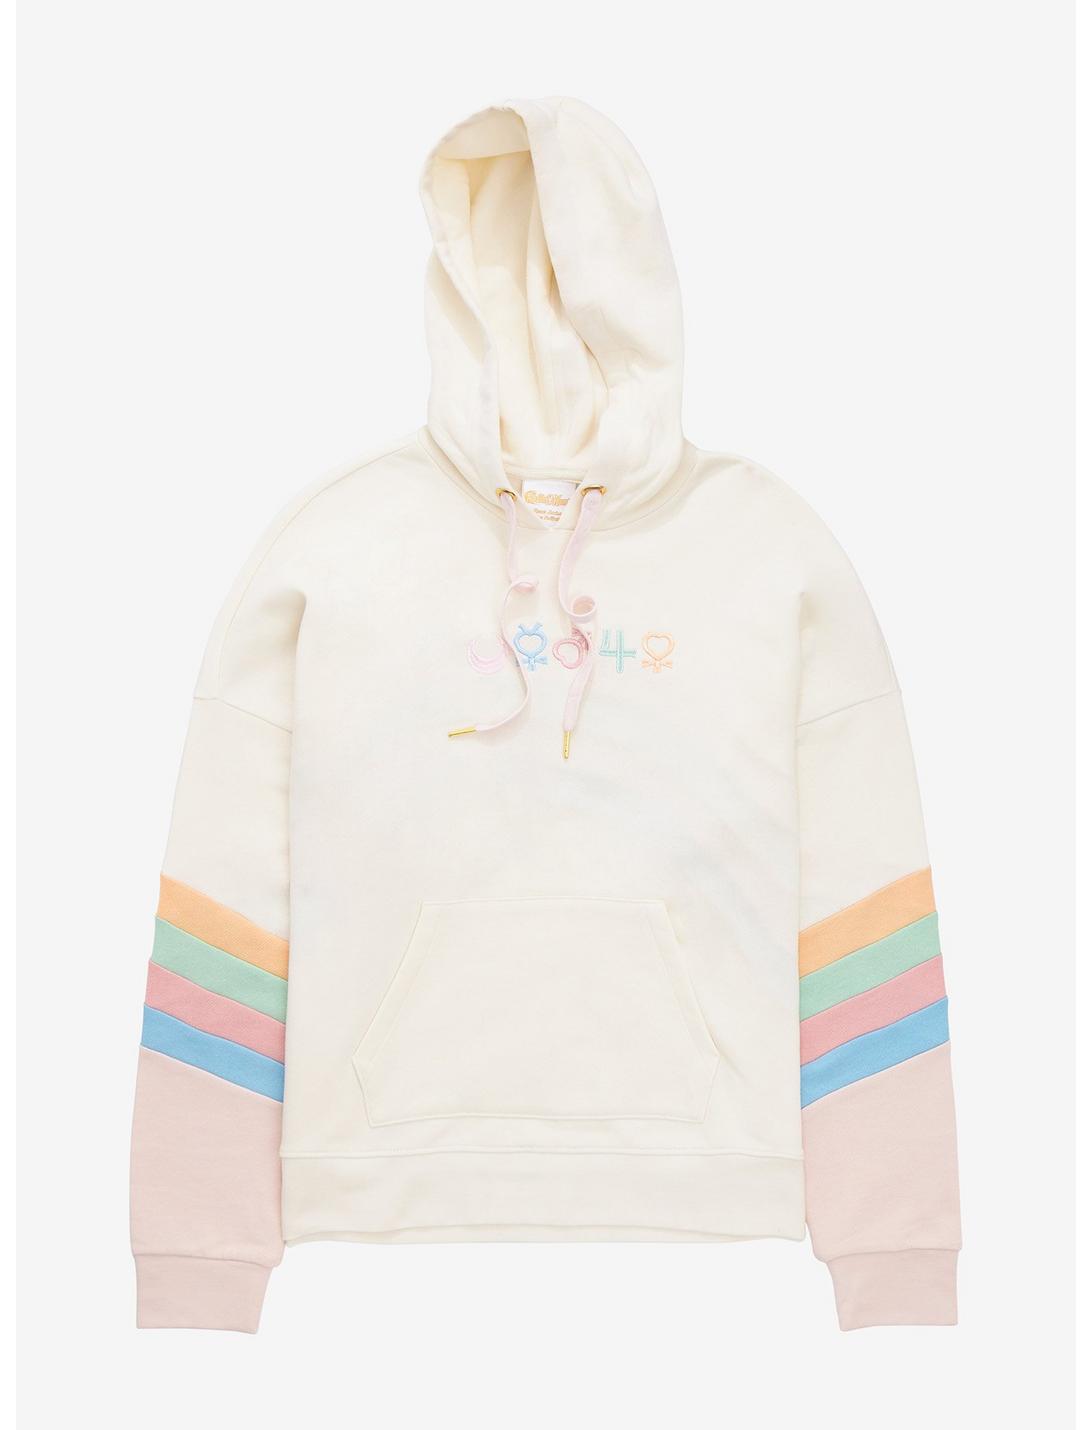 Sailor Moon Sailor Guardians Icons Women's Hoodie - BoxLunch Exclusive, WHITE, hi-res